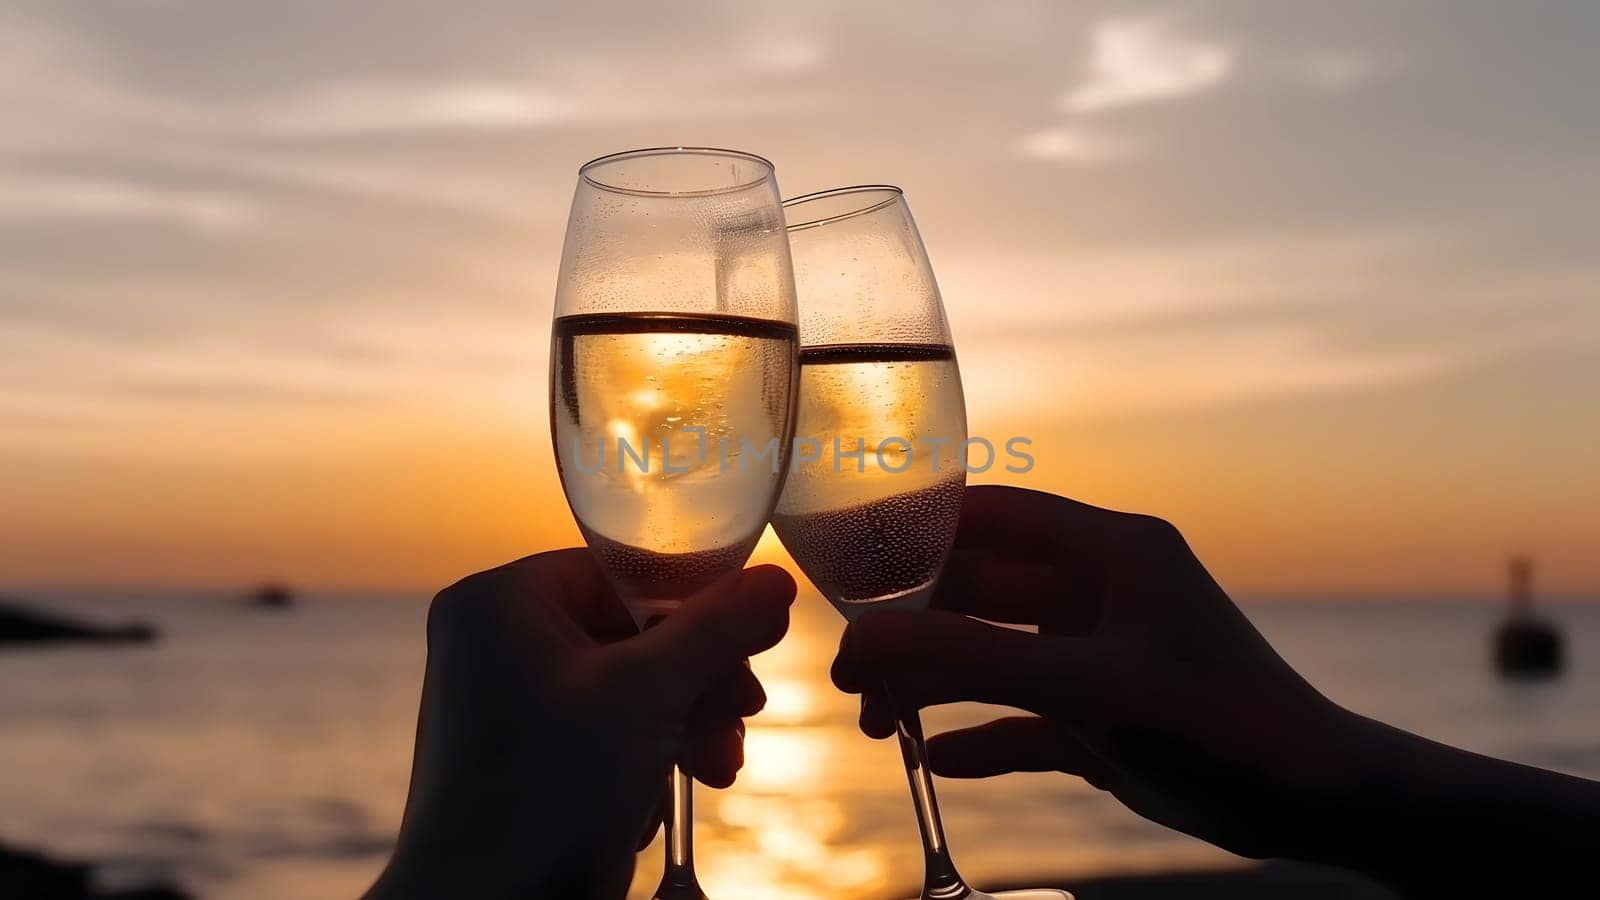 Two caucasian hands holding champagne glasses over the sea. Romantic vacation. Neural network generated in May 2023. Not based on any actual person, scene or pattern.